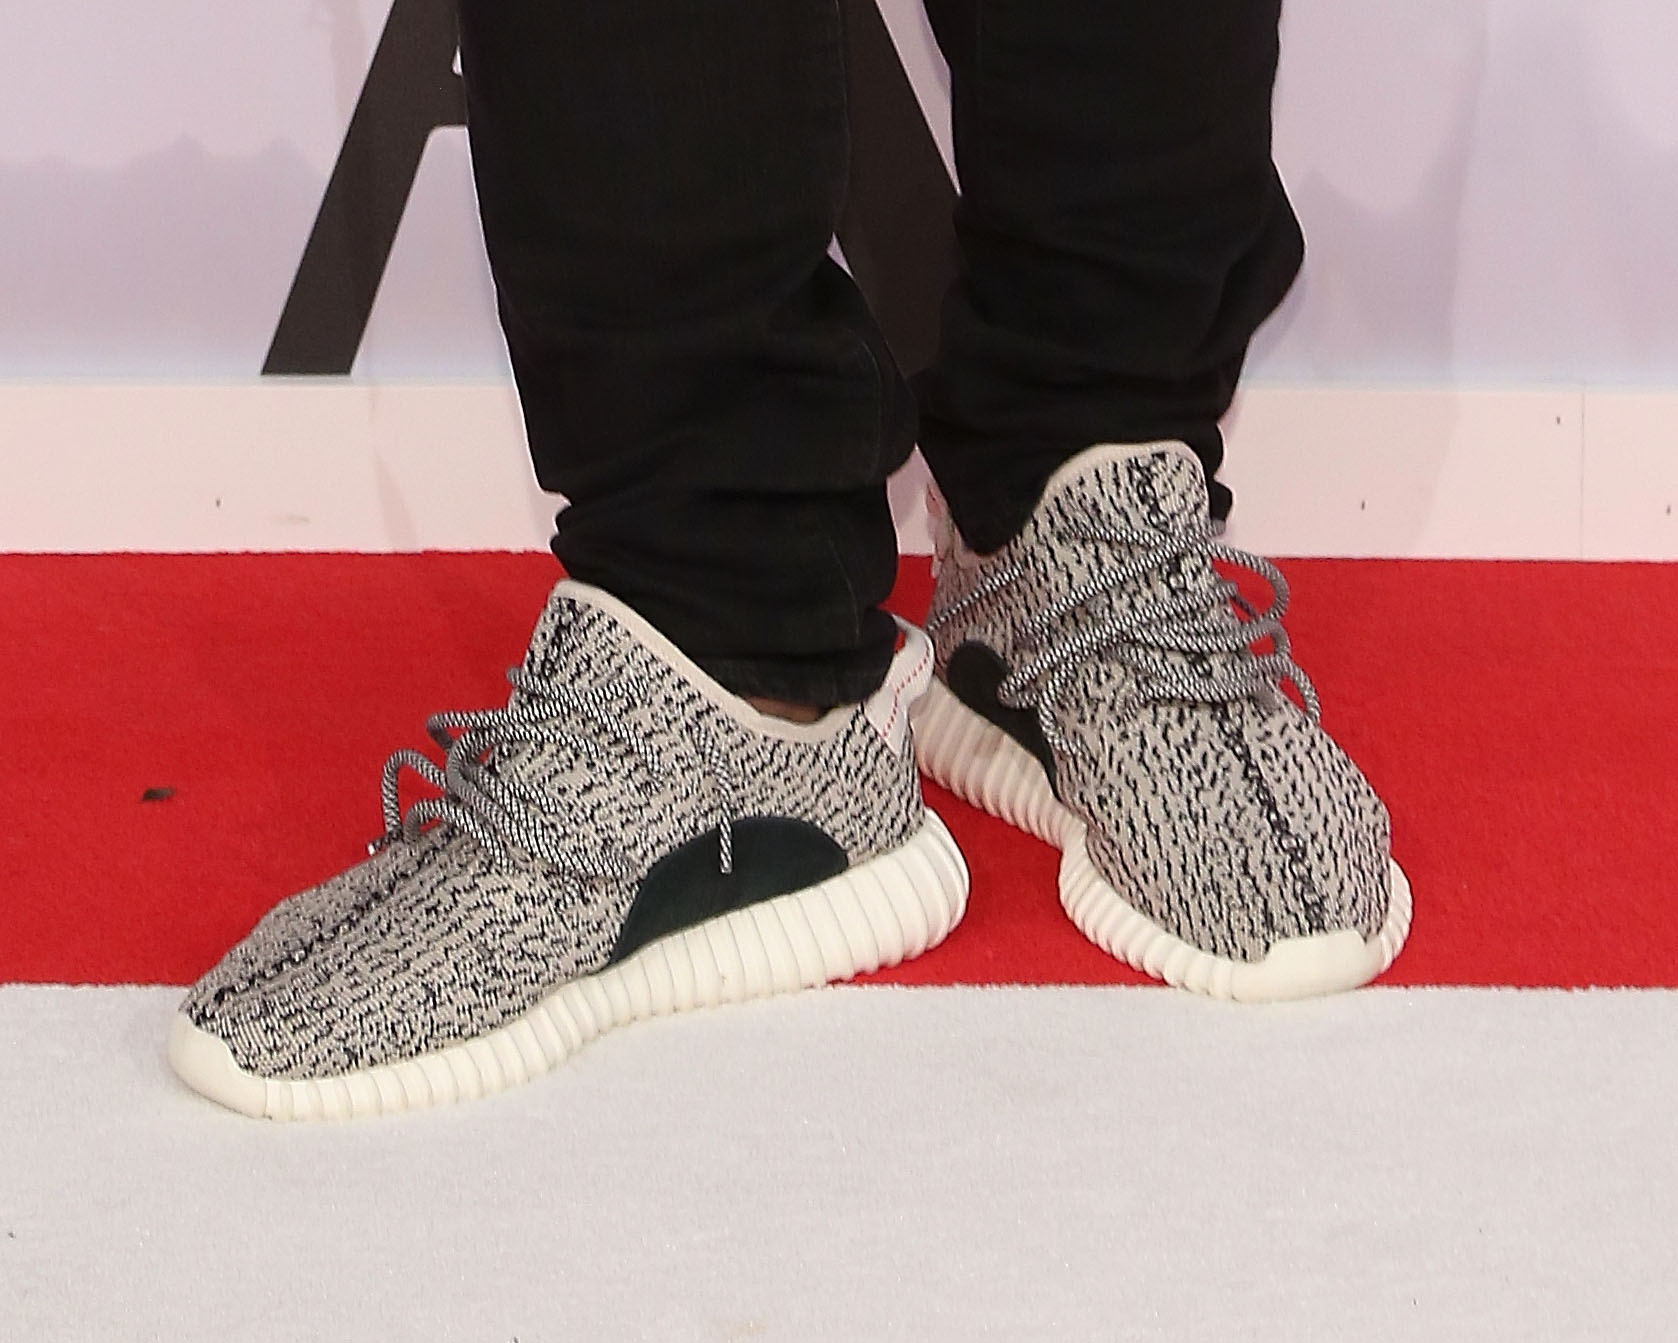 Kanye West's Yeezy Adidas shoes at the 2015 CFDA Awards at Alice Tully Hall at Lincoln Center on June 1, 2015 in New York City. (Taylor Hill—FilmMagic/Getty Images)